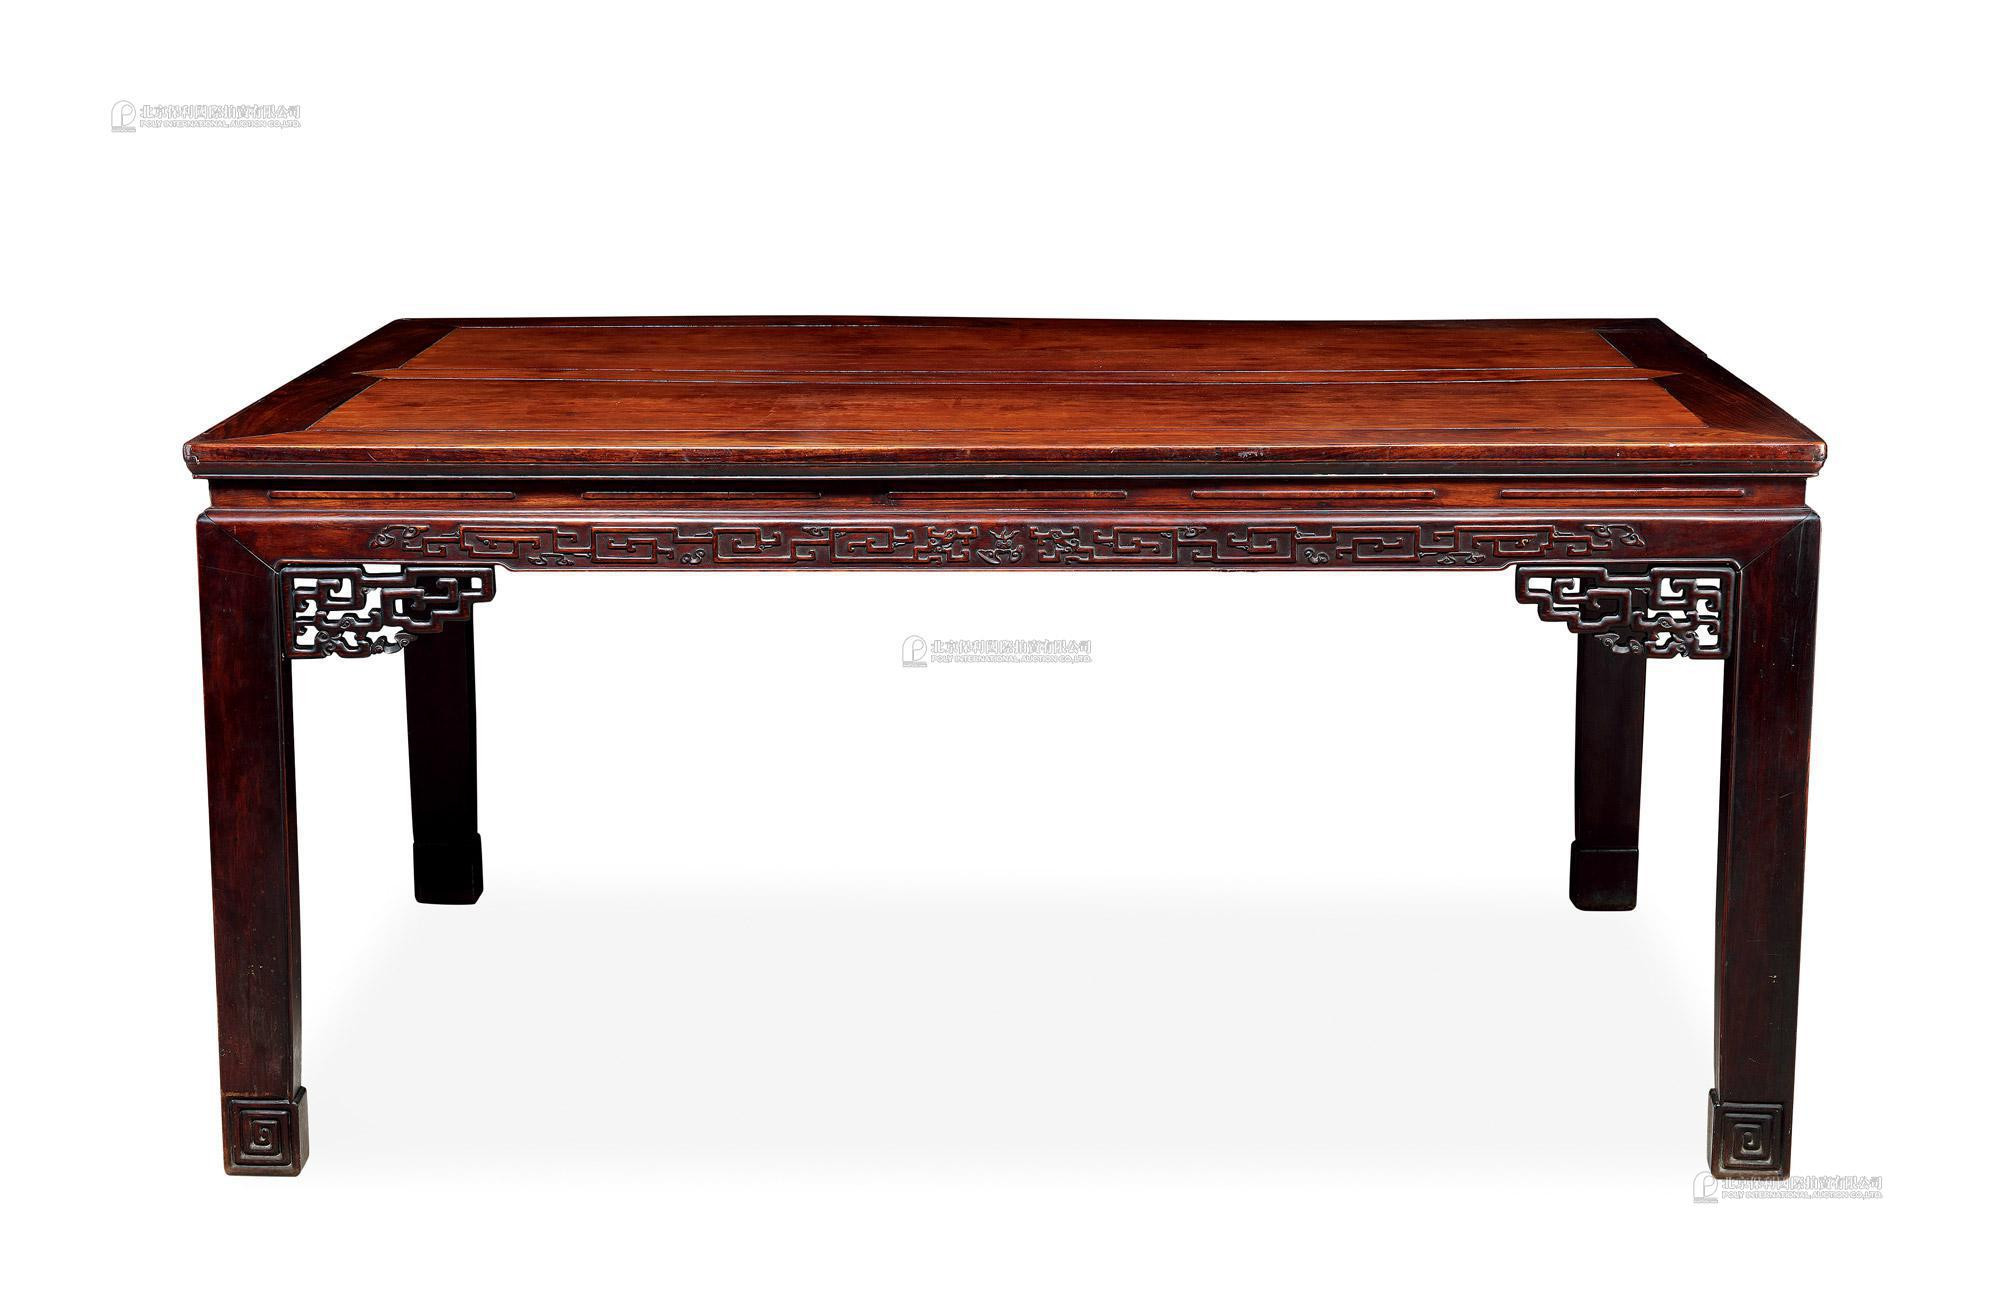 A LARGE ROSEWOOD PAINTING TABLE WITH CHI-DRAGON DESIGN